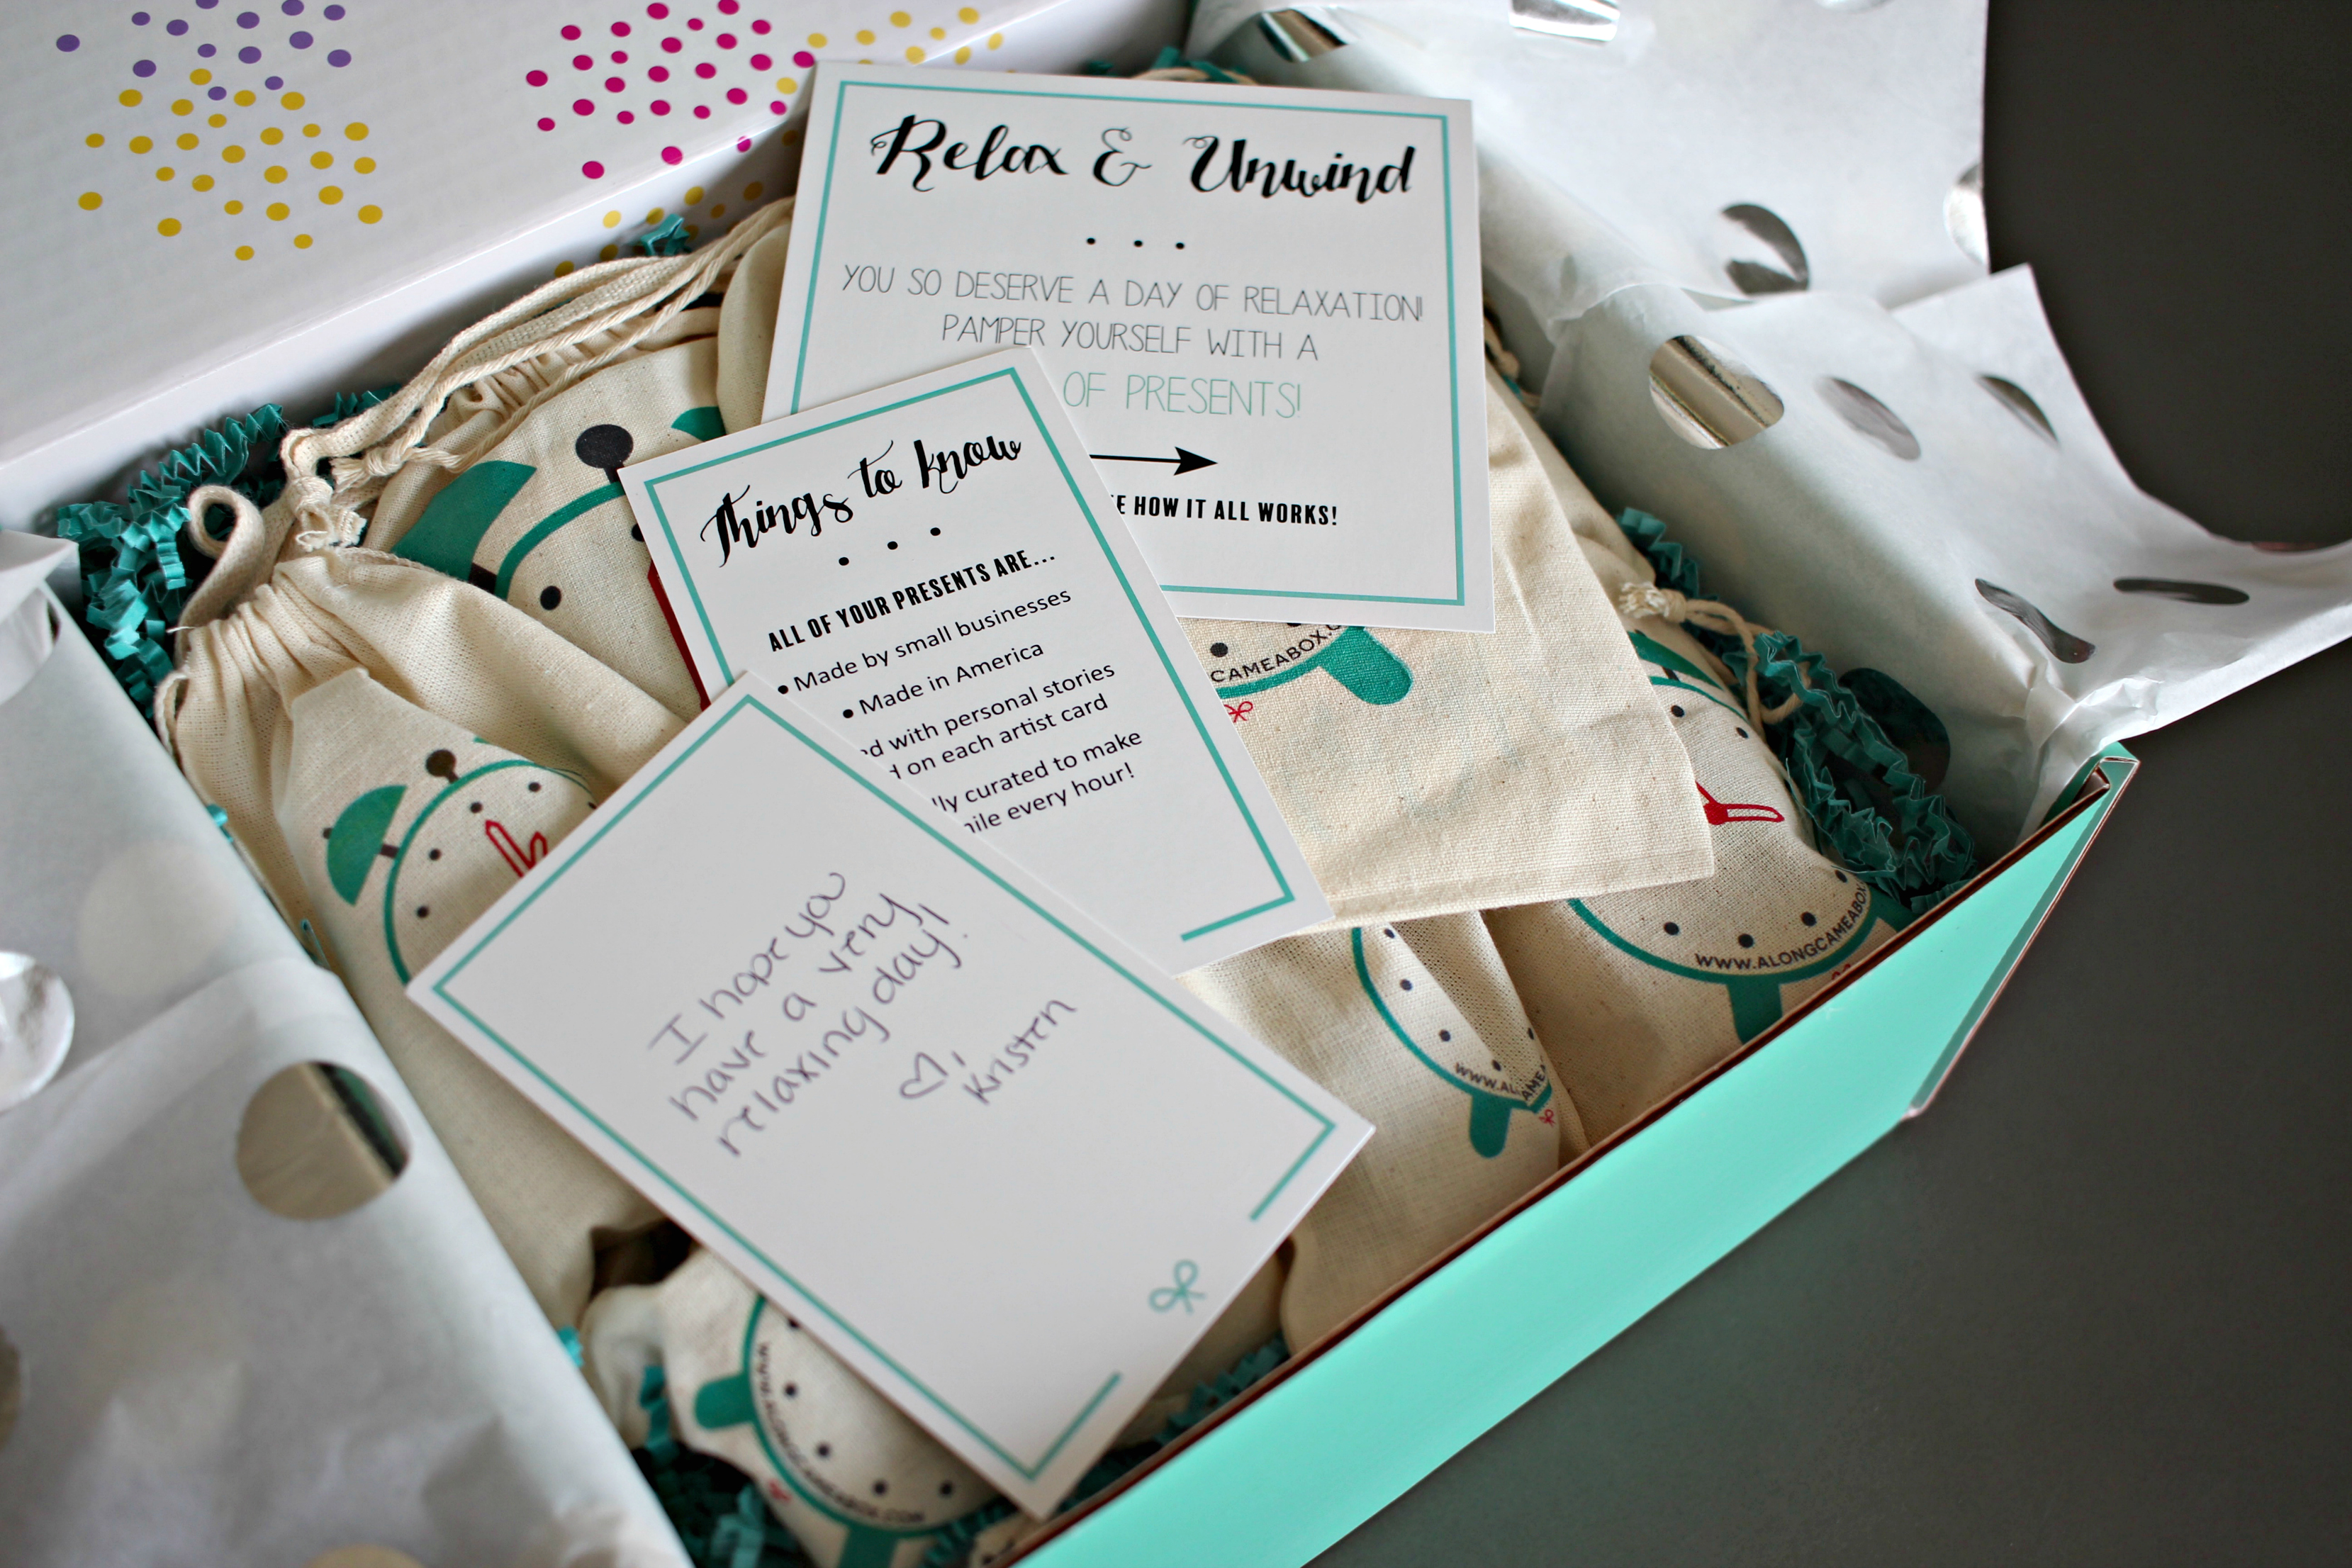 snail mail gift idea via Finding Beautiful Truth